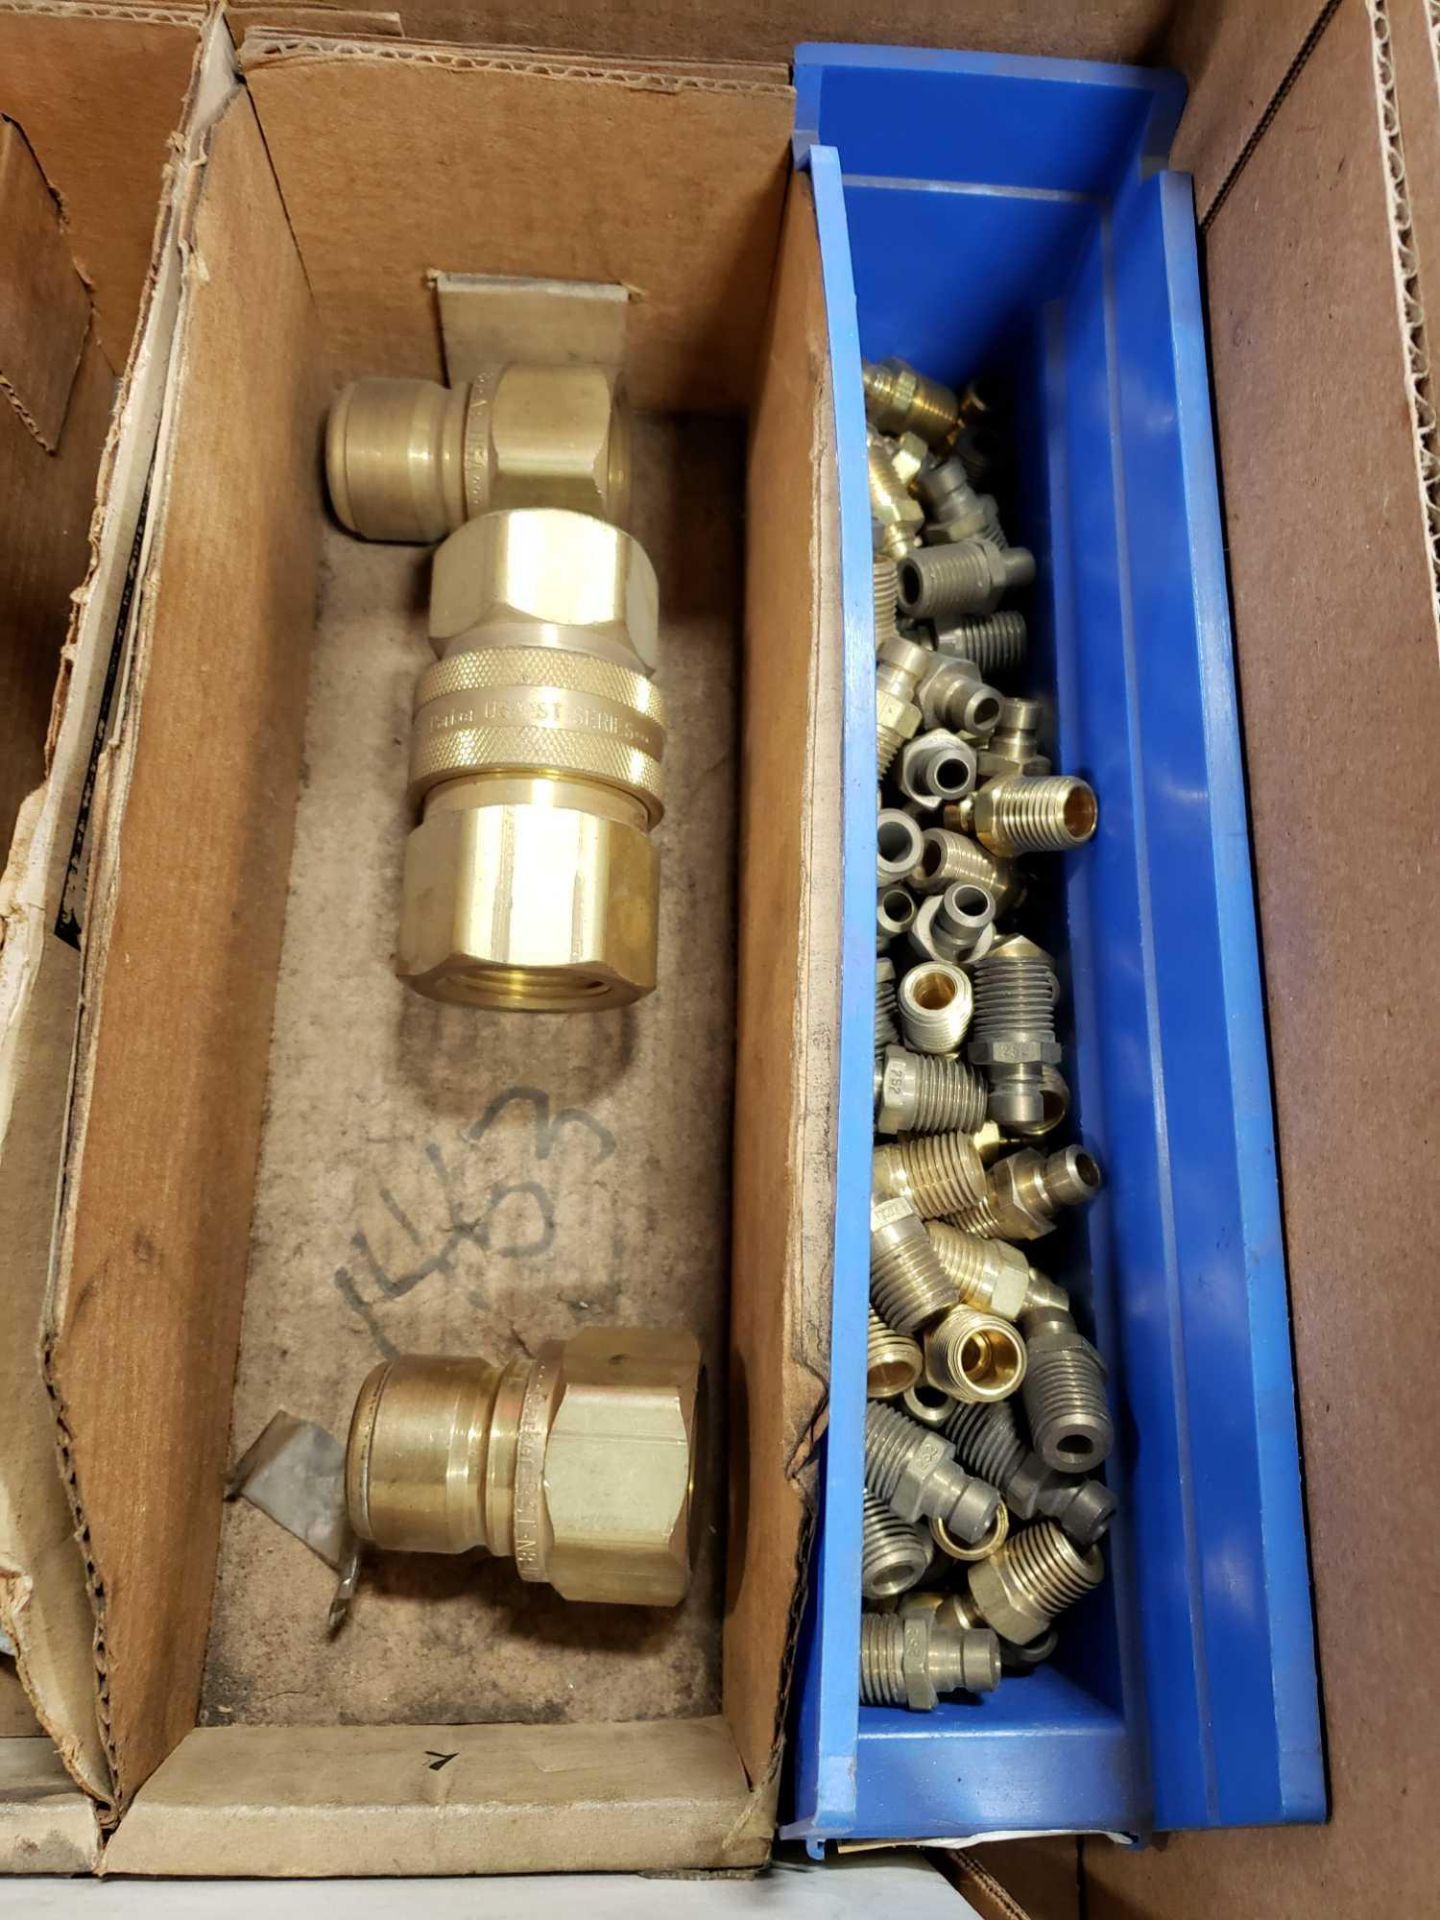 Lot of assorted hydraulic and pneumatic fittings. New as pictured. - Image 4 of 4